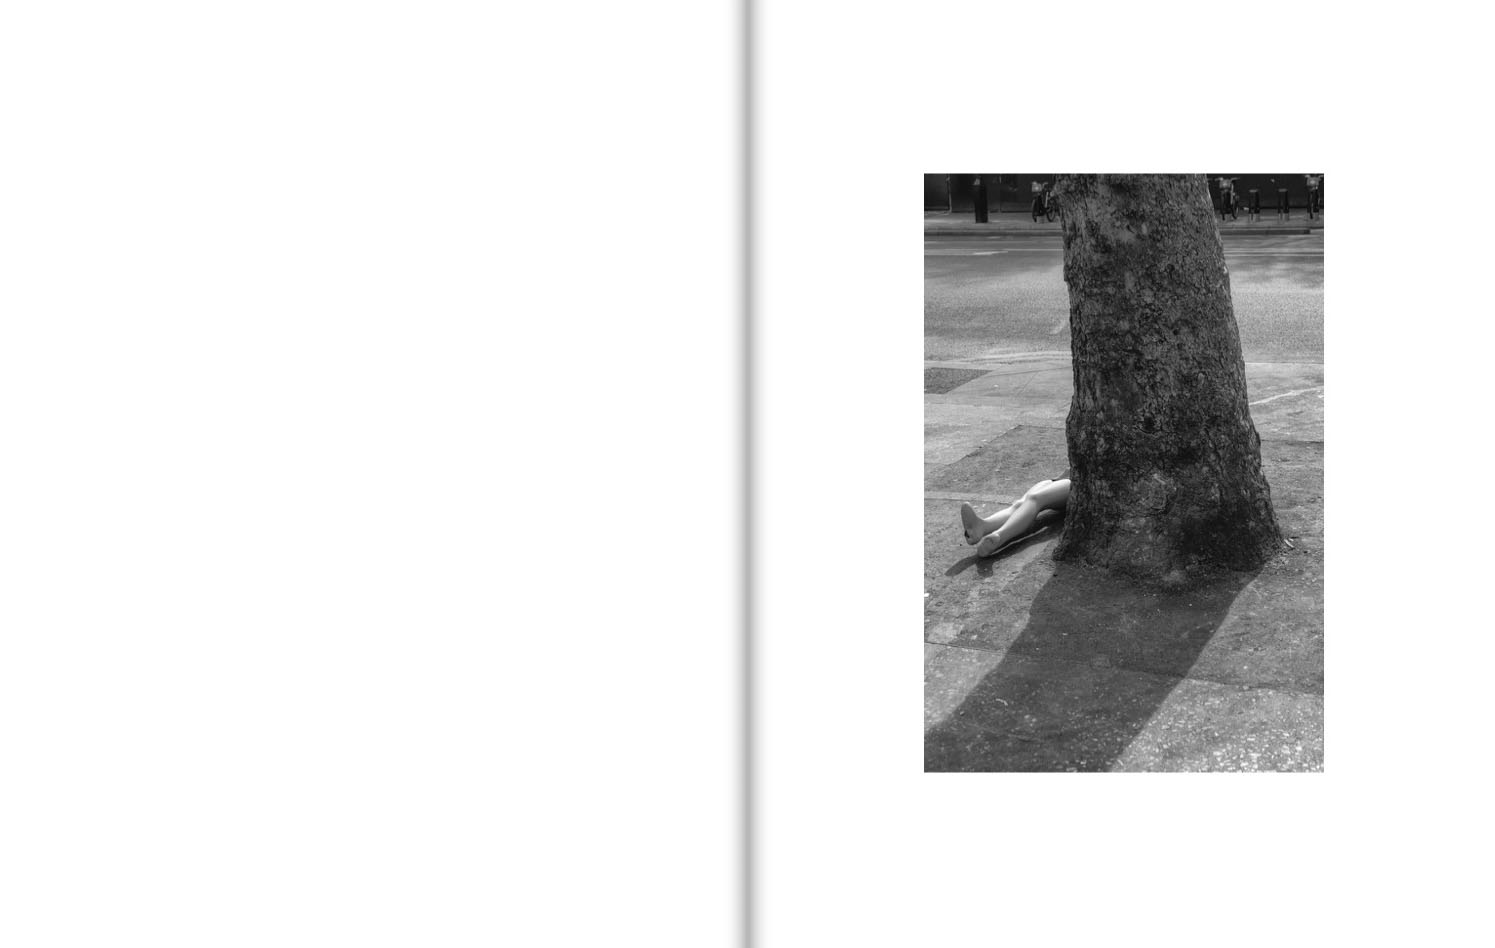 The legs of a shop mannequin, lying on a pavement, protrude from behind the trunk of a tree.